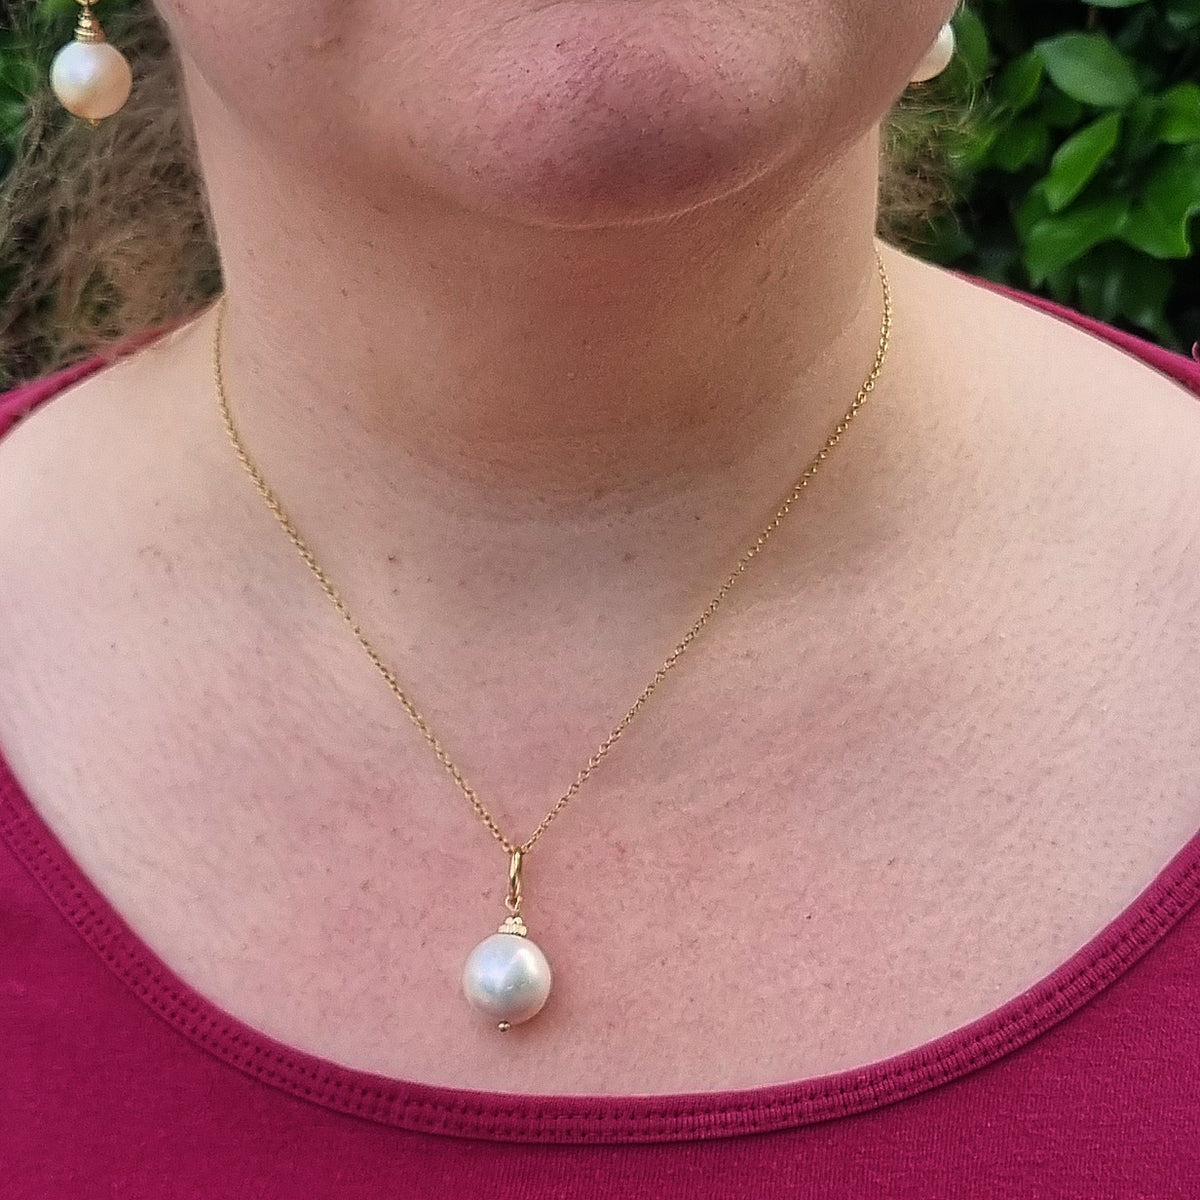 Samantha Large Pearl Pendant Necklace Sterling Silver or Gold Filled